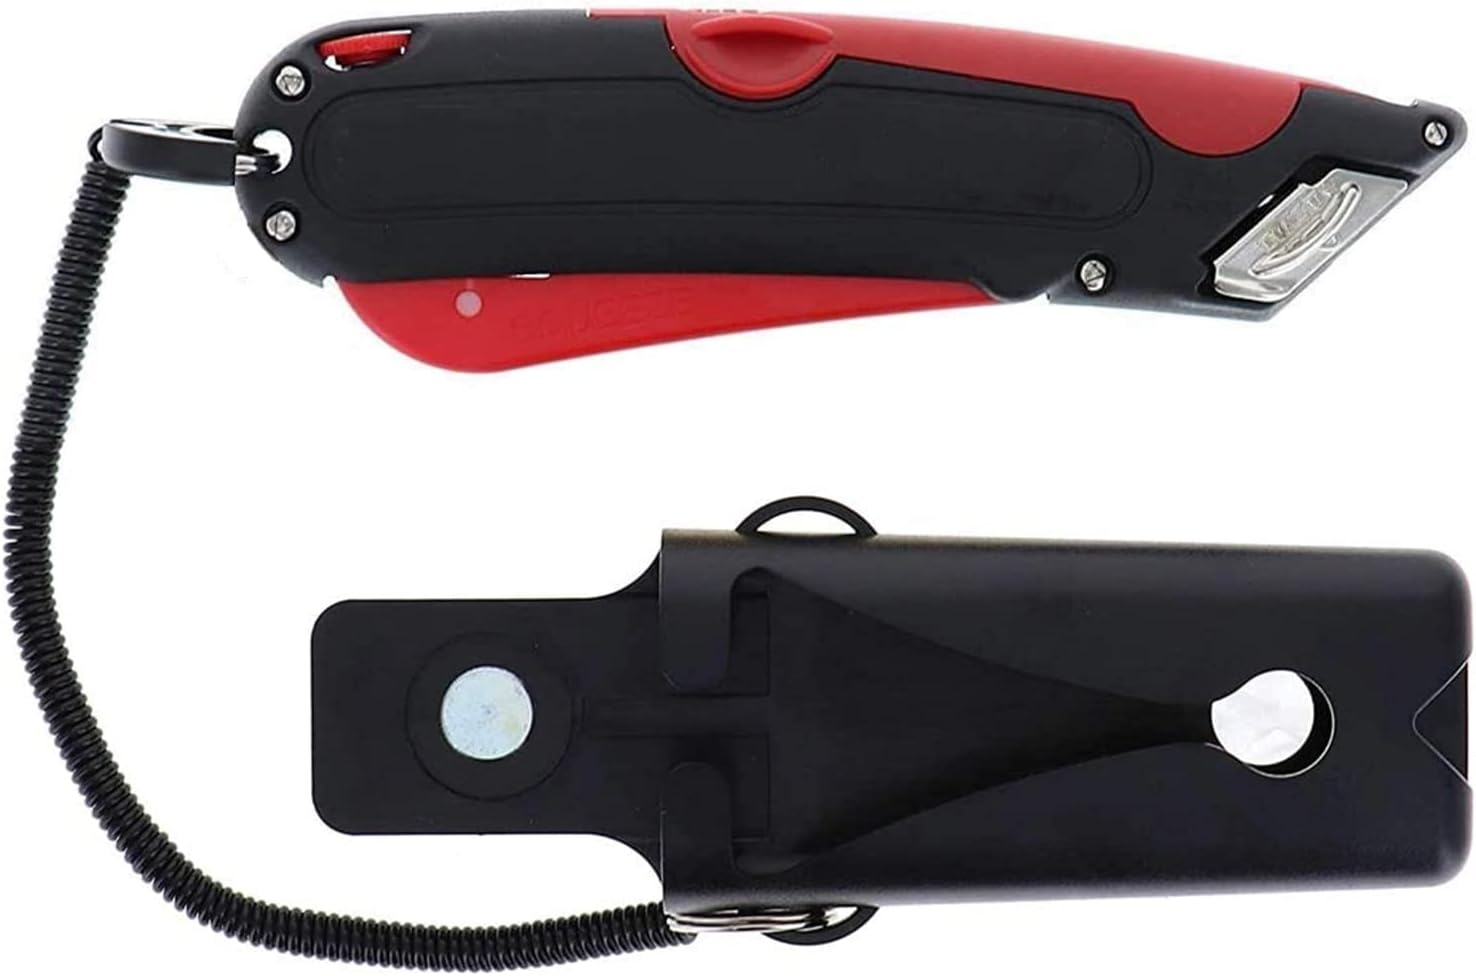 Veltec, LLC Veltec EZ-1000 Safety Box Cutter Utility Knife, 3 Blade Depth Setting, Squeeze Trigger and Dual Side Edge Guide, 2 Blades, Hols